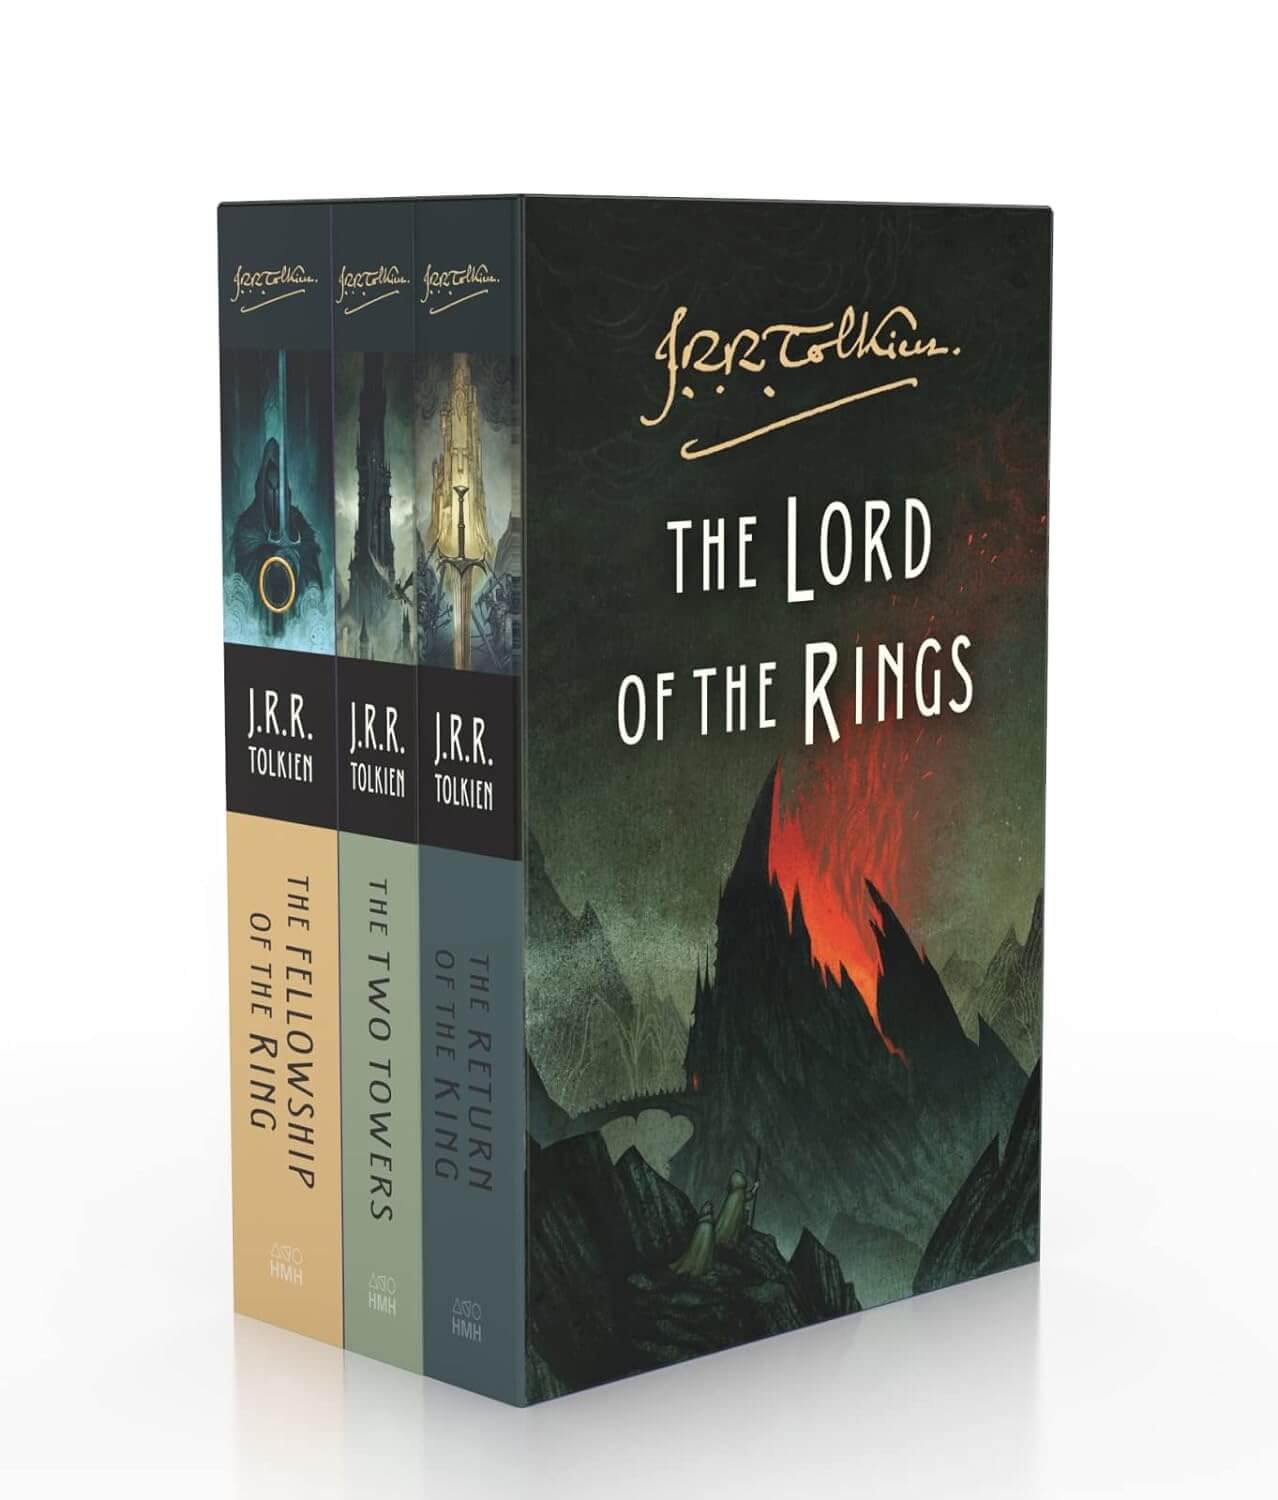 “The Lord of the Rings Trilogy” by J.R.R. Tolkien (1954)